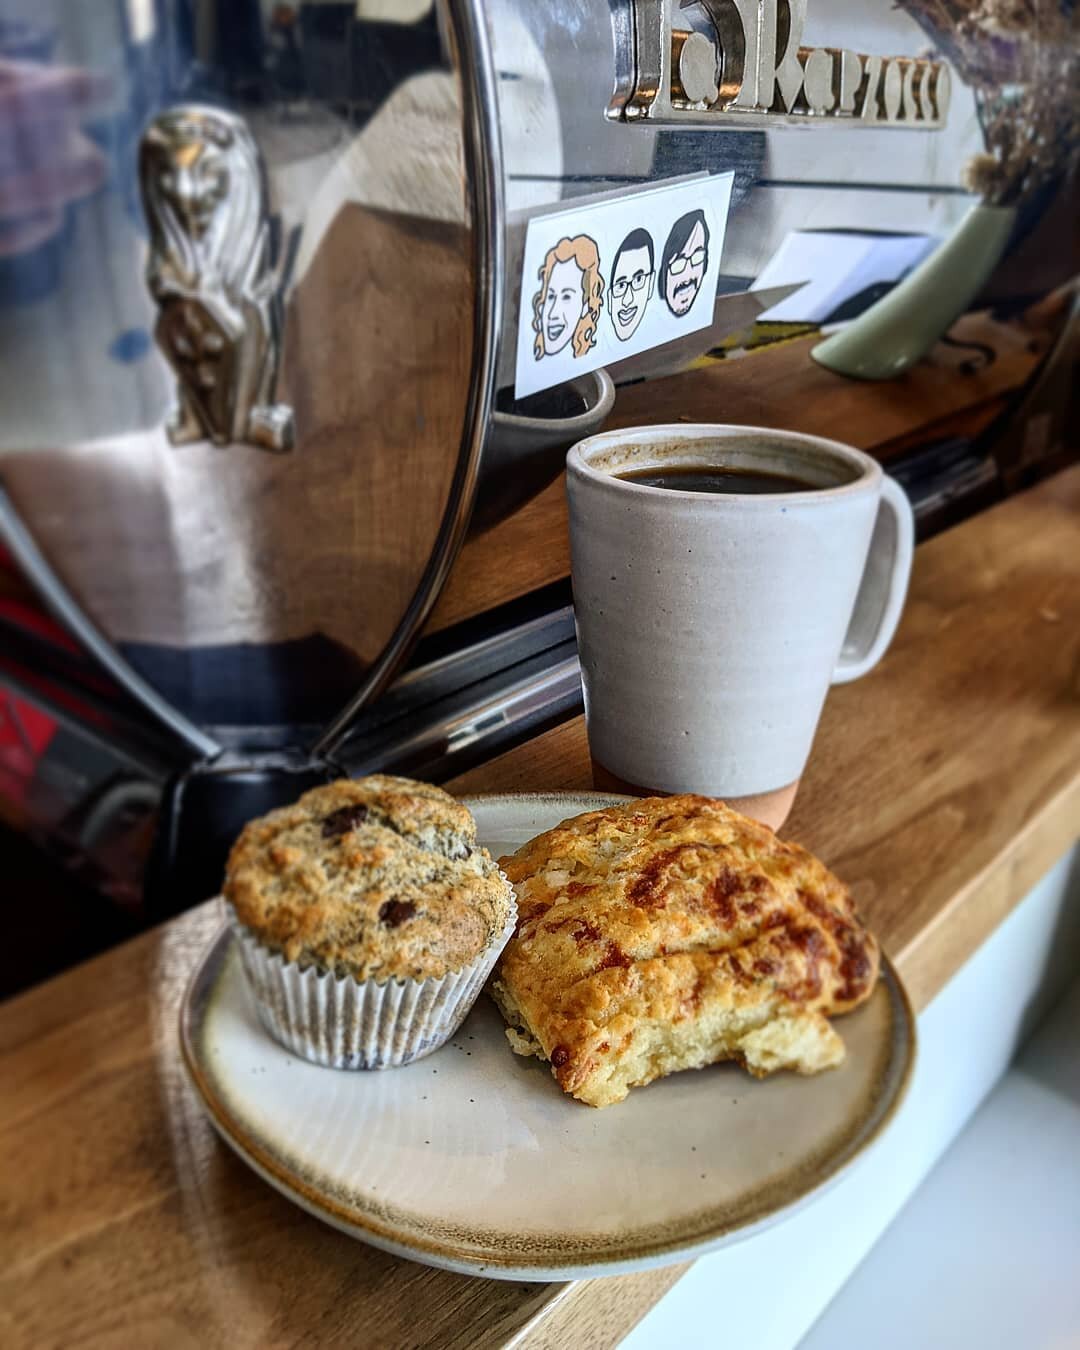 Come in and try the new pastries from @milkandhoneymi!
.
New Asiago &amp; Herb Scones 🧀🌿
Black Sesame &amp; Chocolate Chip Muffins. 🍫🧁
.
.
.
If anyone feels inclined to make a muffin emoji, please send it our way. 🙏🏻
#cafe #cahoots #scones #muf